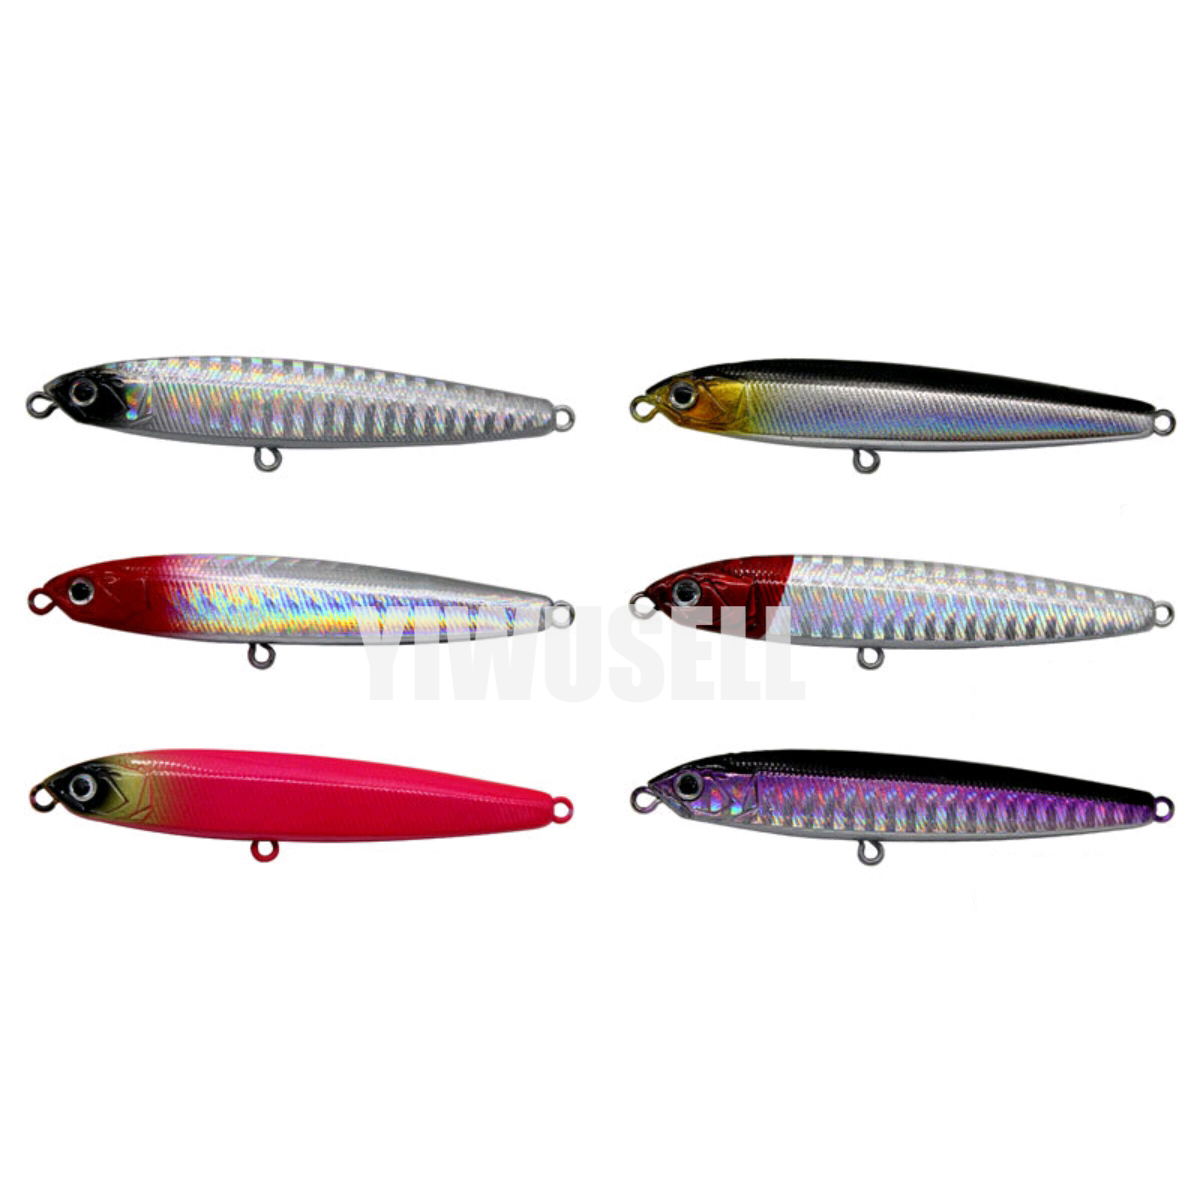 Best Fishing Lures for sale -  YIWUSELL, HOME, KITCHEN, PET, CAMPING, STATIONERY, TOOLS